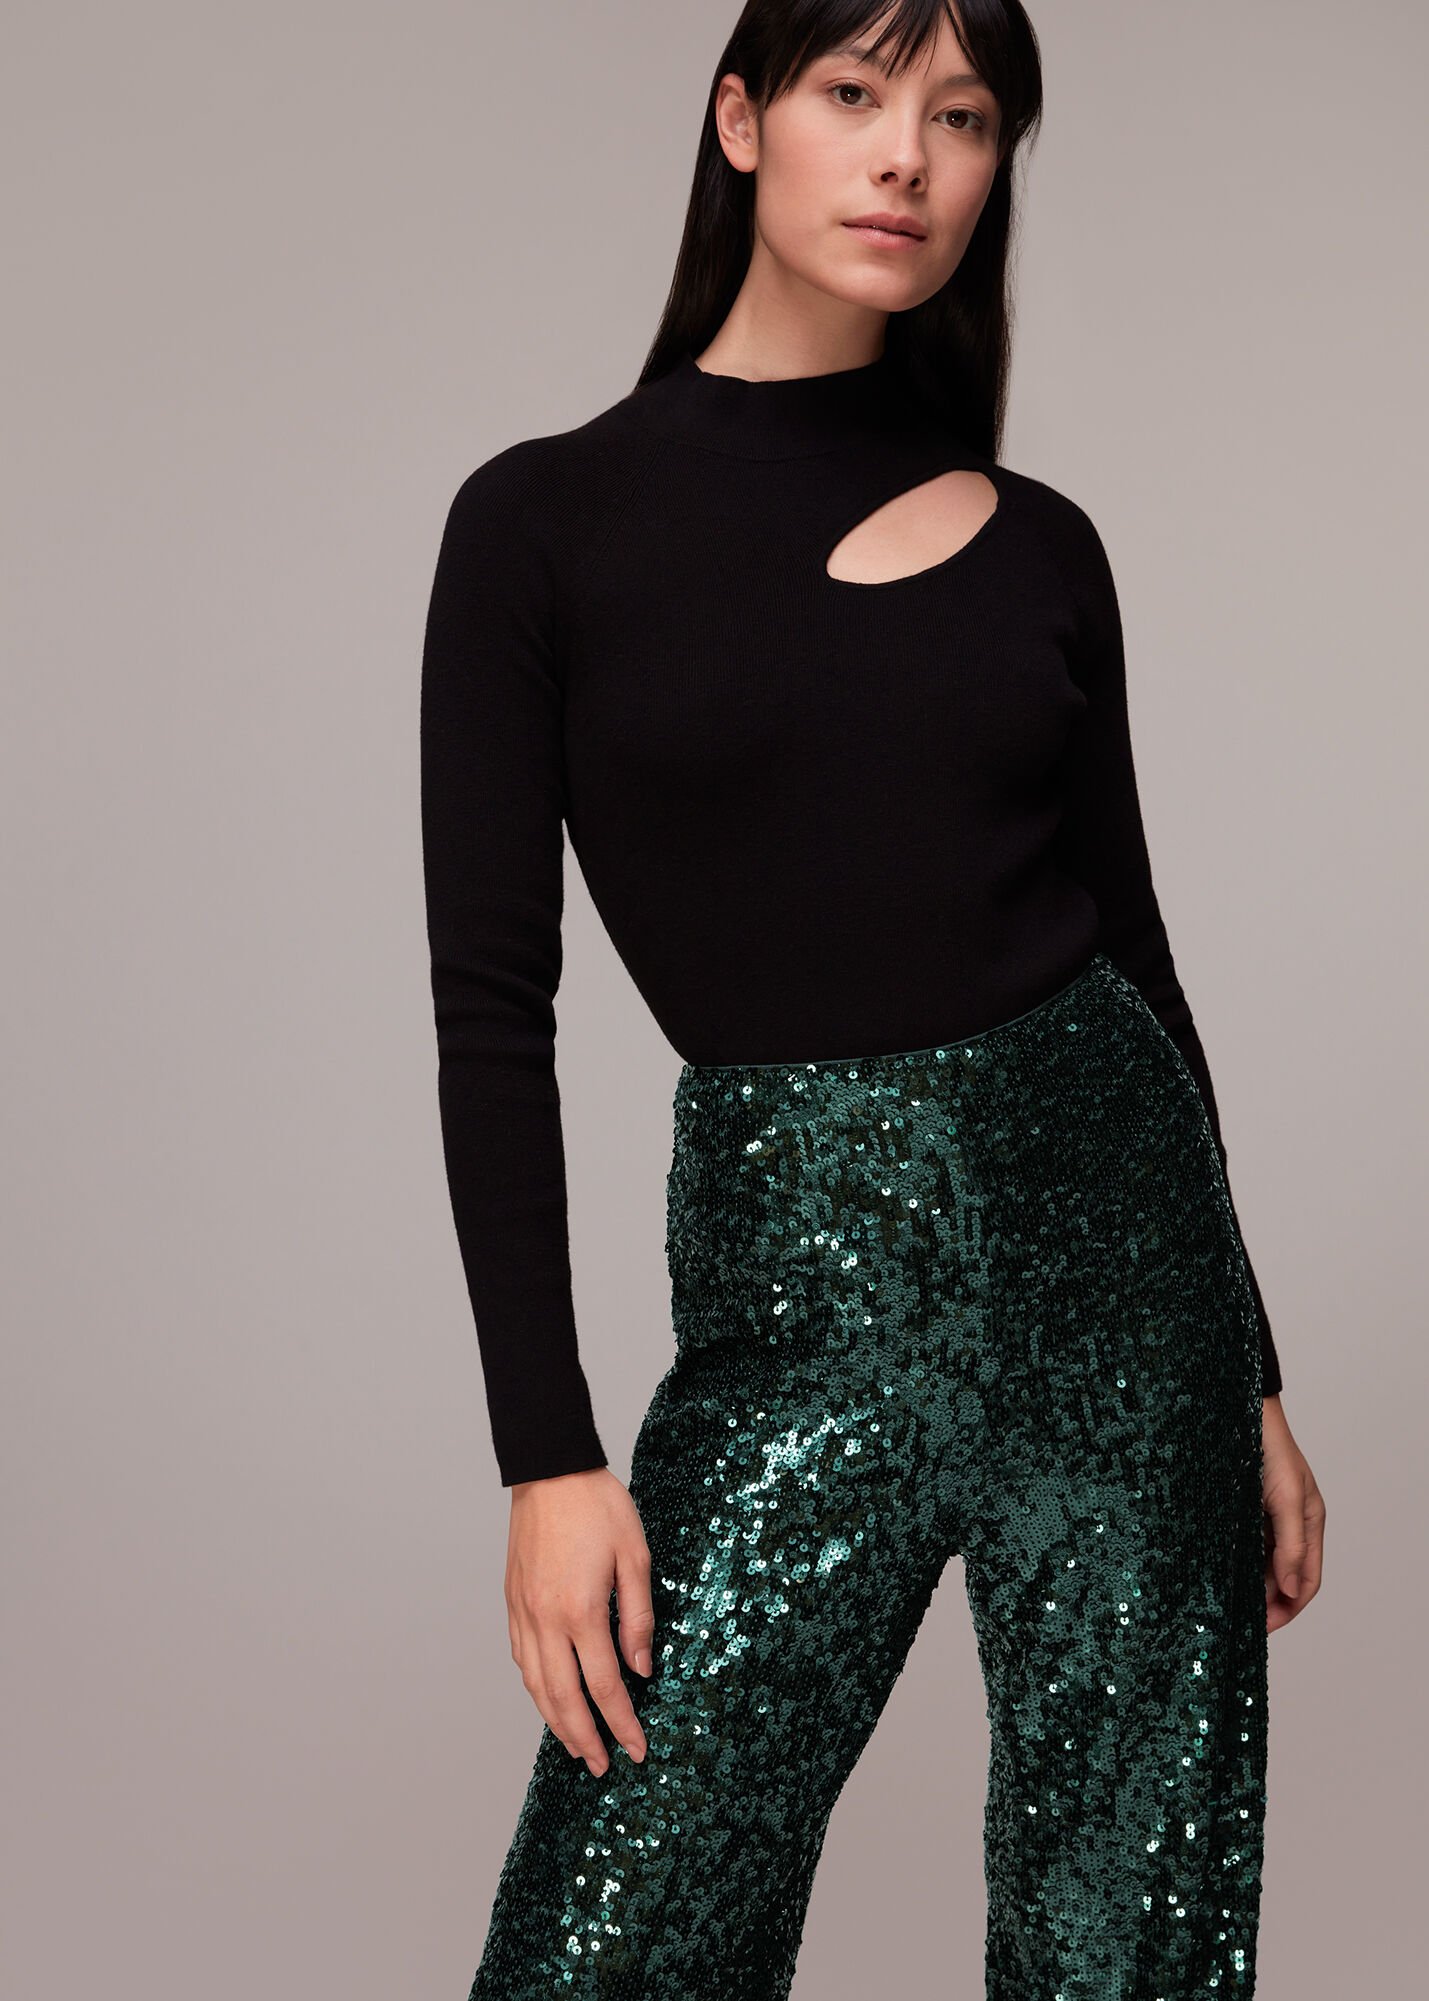 Marks And Spencers green Sequin Elasticated Waist wide leg Trousers 10  Short  eBay